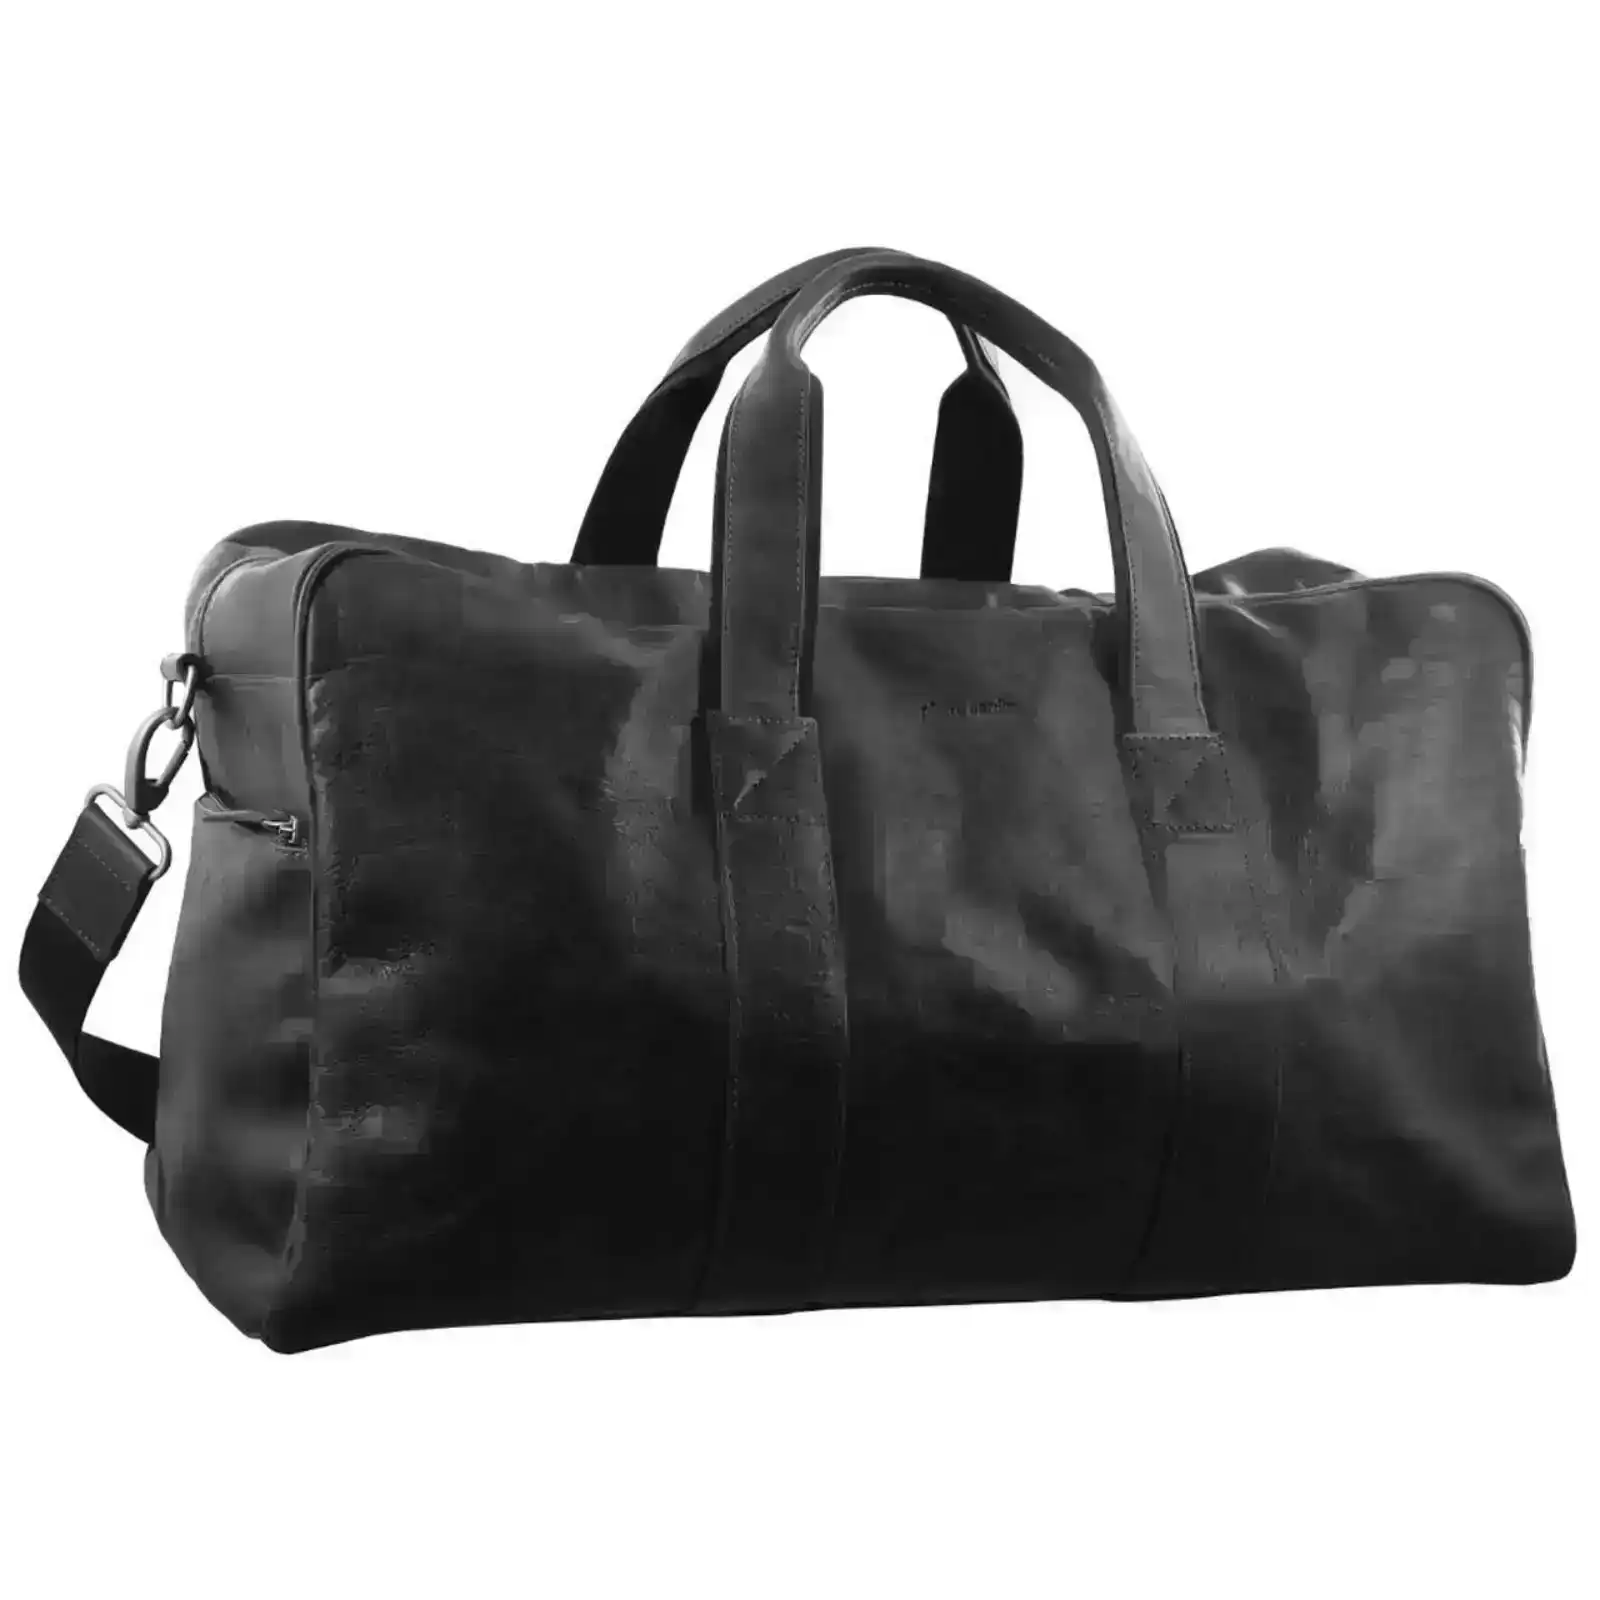 Pierre Cardin Rustic Leather Travel Bag Overnight Business Weekend Luggage Black